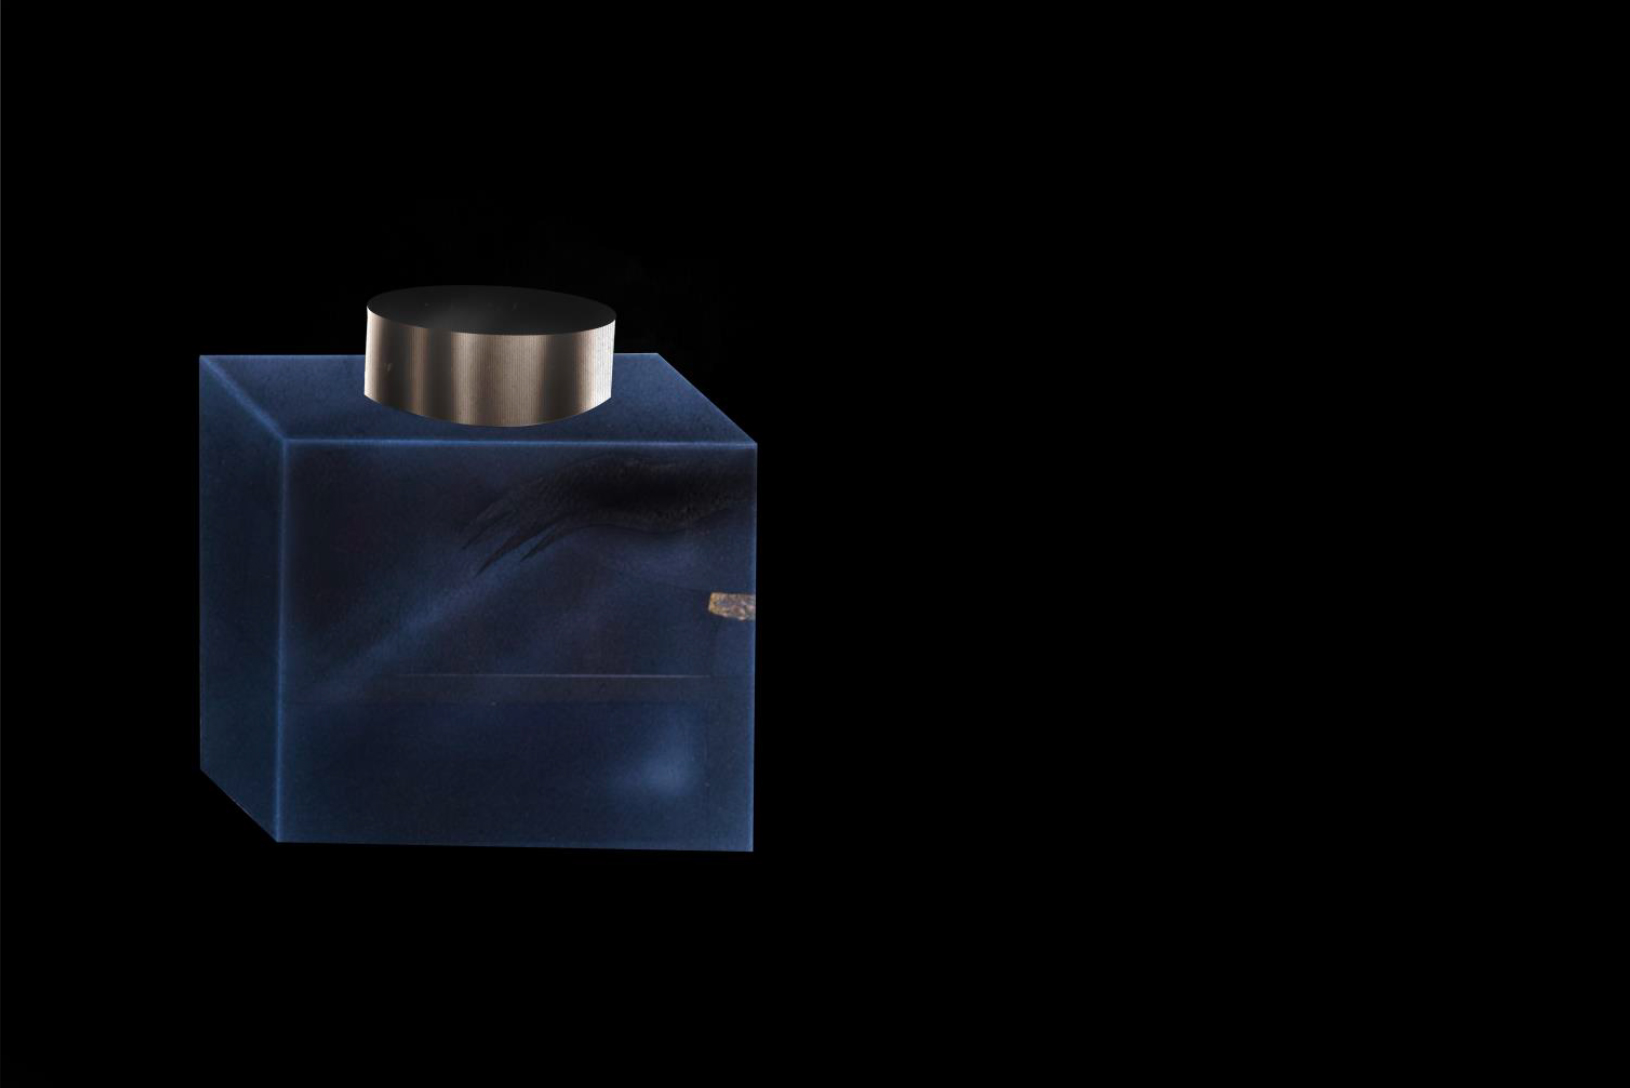 An illustration of an ink well on a black background. The ink well is dark blue and has brass lid. The illustration has been painted with an air brush.